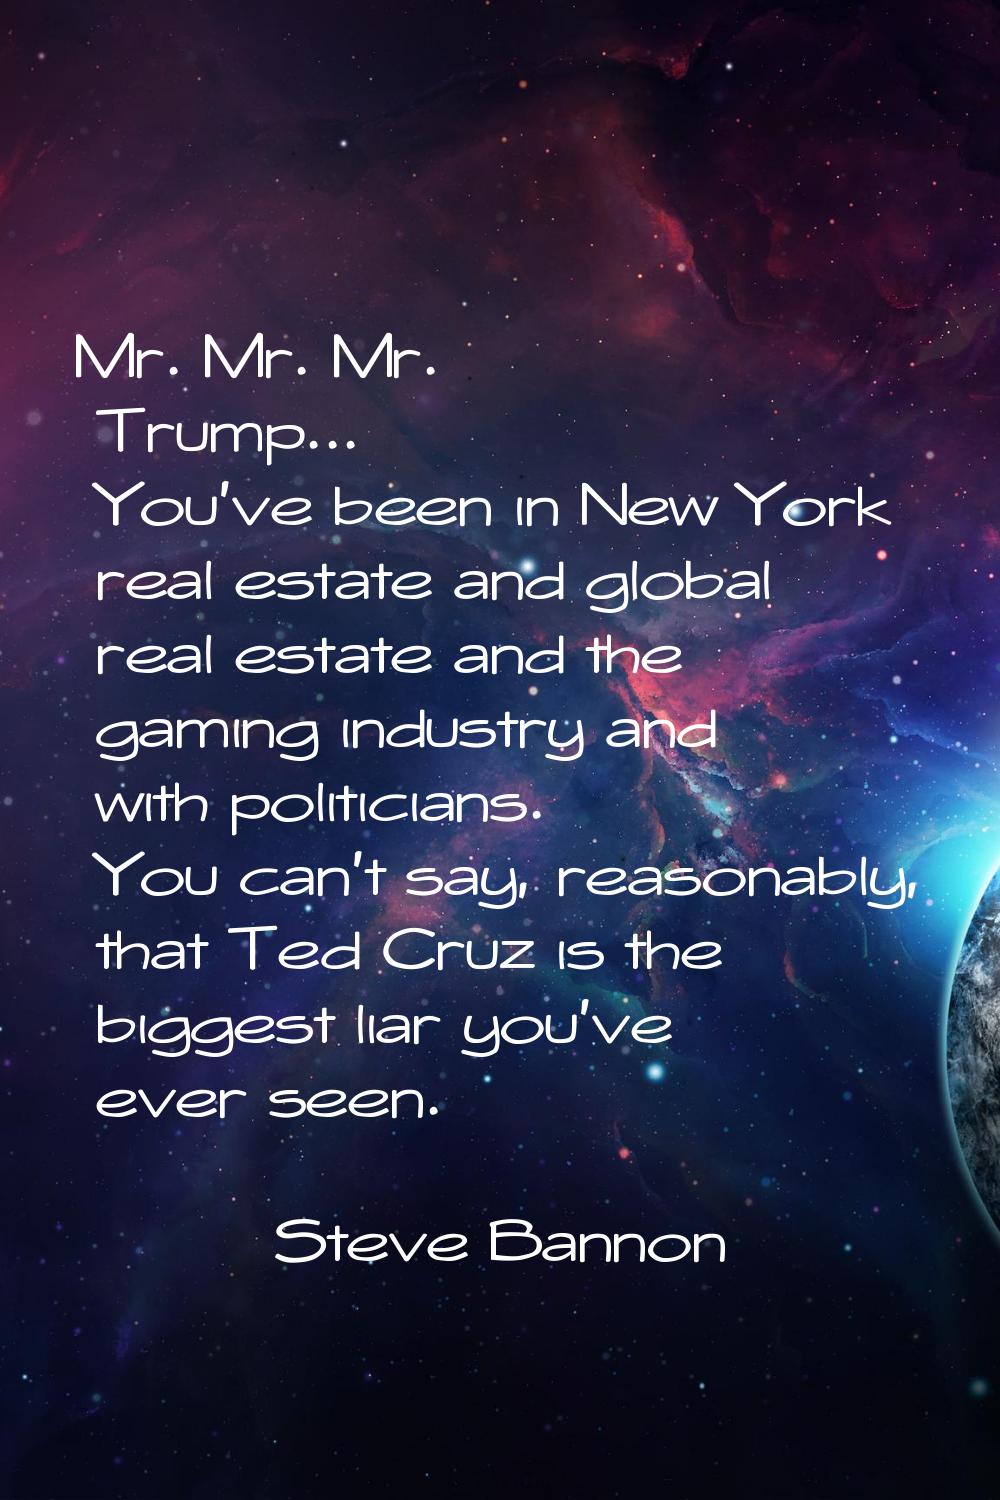 Mr. Mr. Mr. Trump... You've been in New York real estate and global real estate and the gaming indu